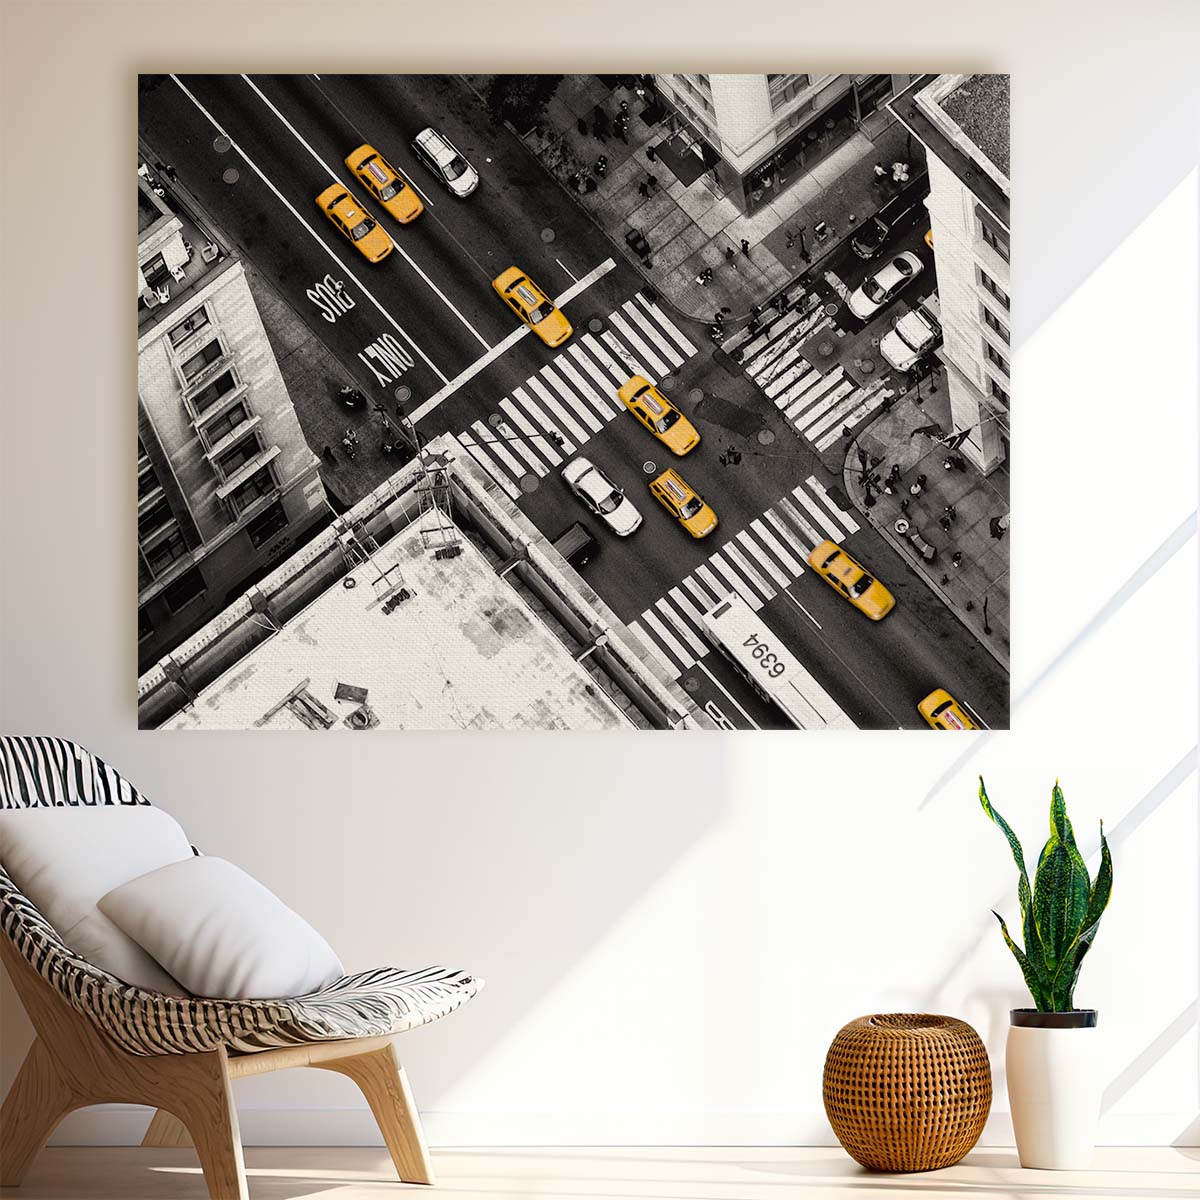 NYC Yellow Cab Street Scene Wall Art by Luxuriance Designs. Made in USA.